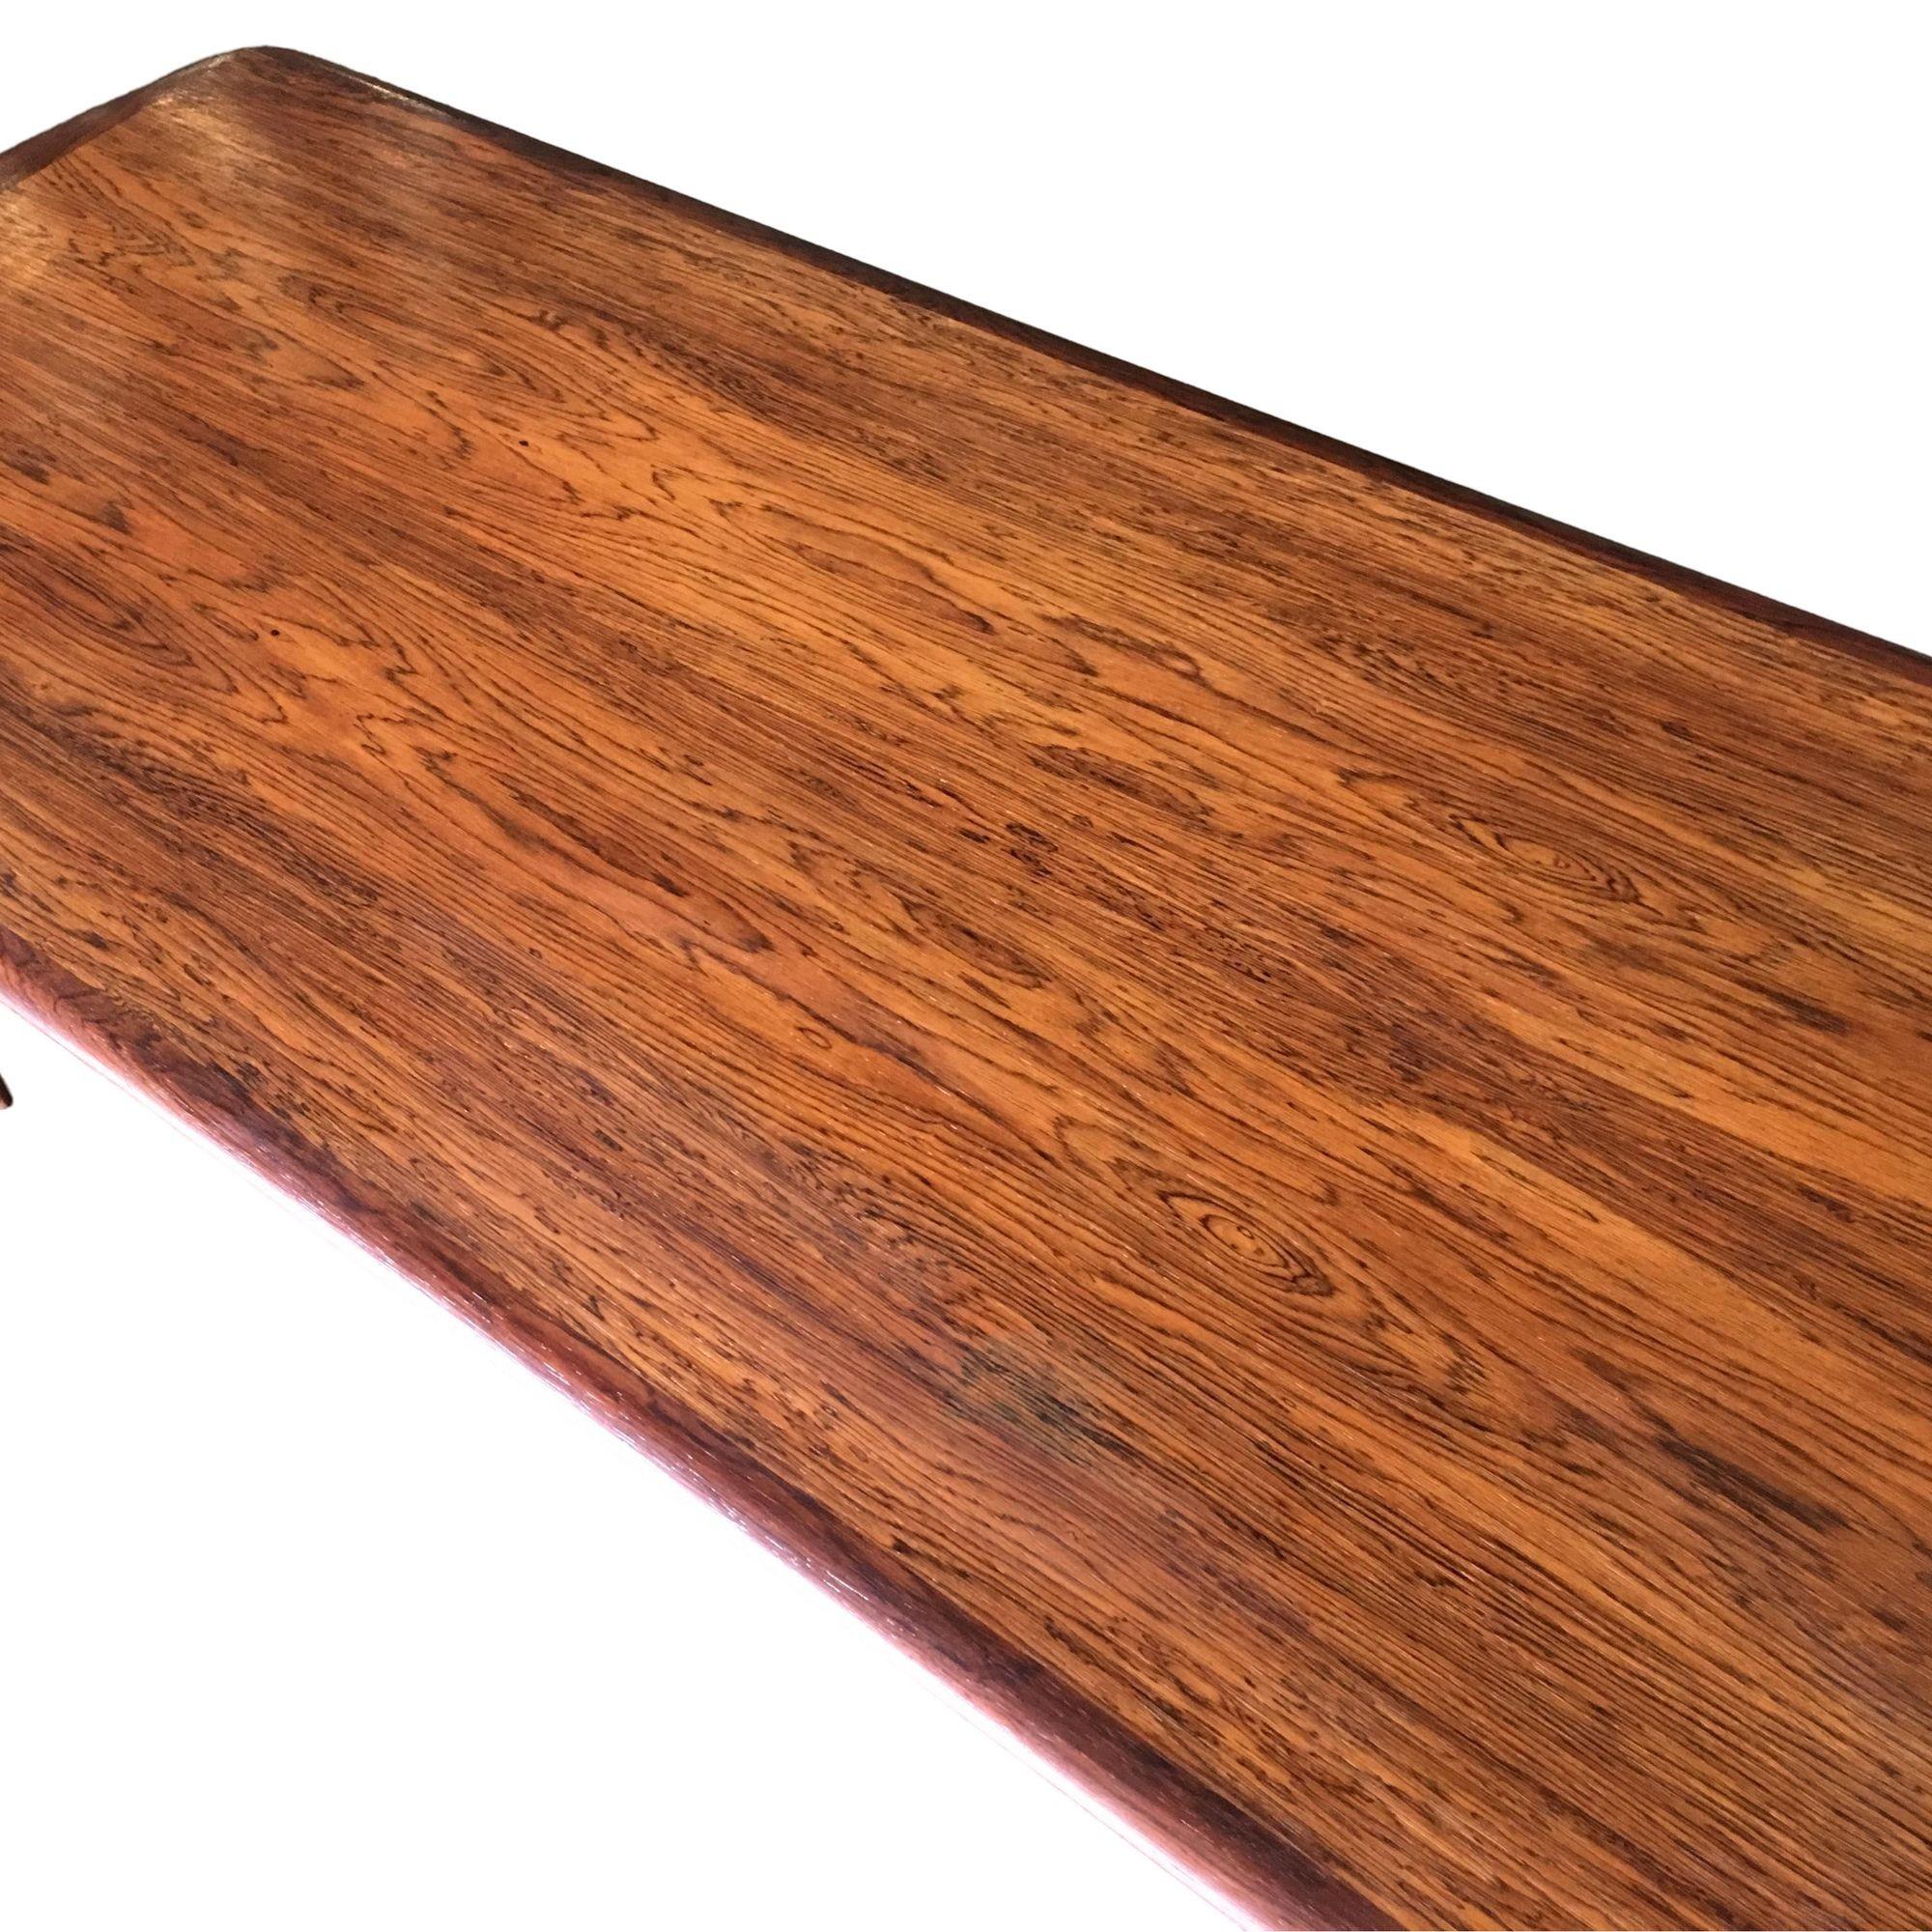 Swedish Mid Century Rosewood Coffee Table by Folke Ohlsson For Sale 1